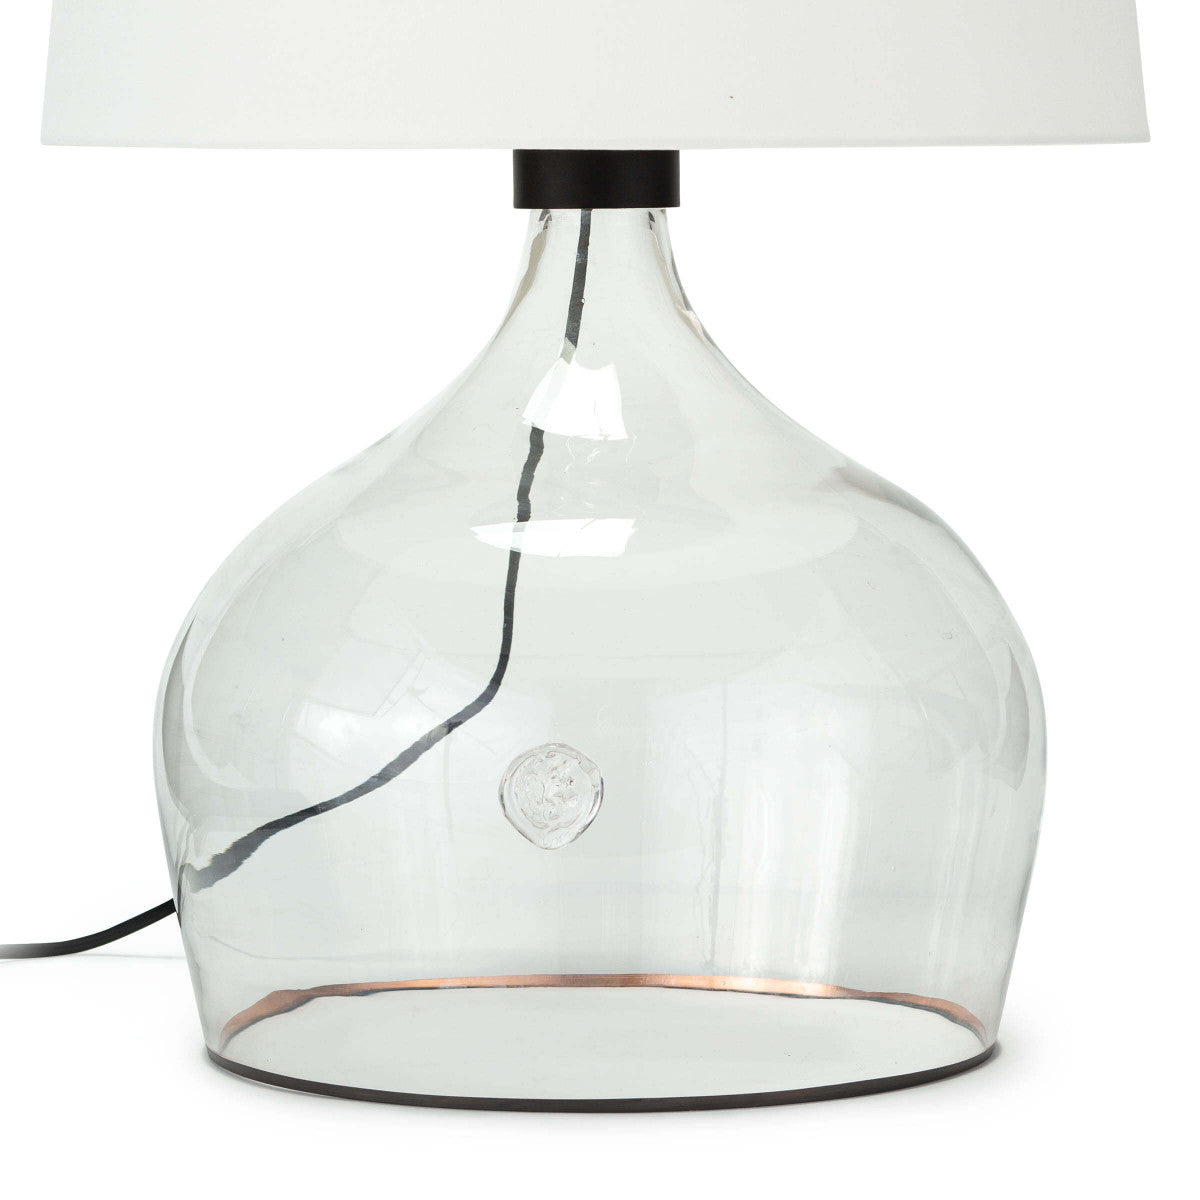 We love the stunning glass vessel on this Demi John Large Table Lamp. Add this in your living room or bedroom to give the room some refreshing character.   Size: 18"w x 18"d x 26.5"h Material: Glass